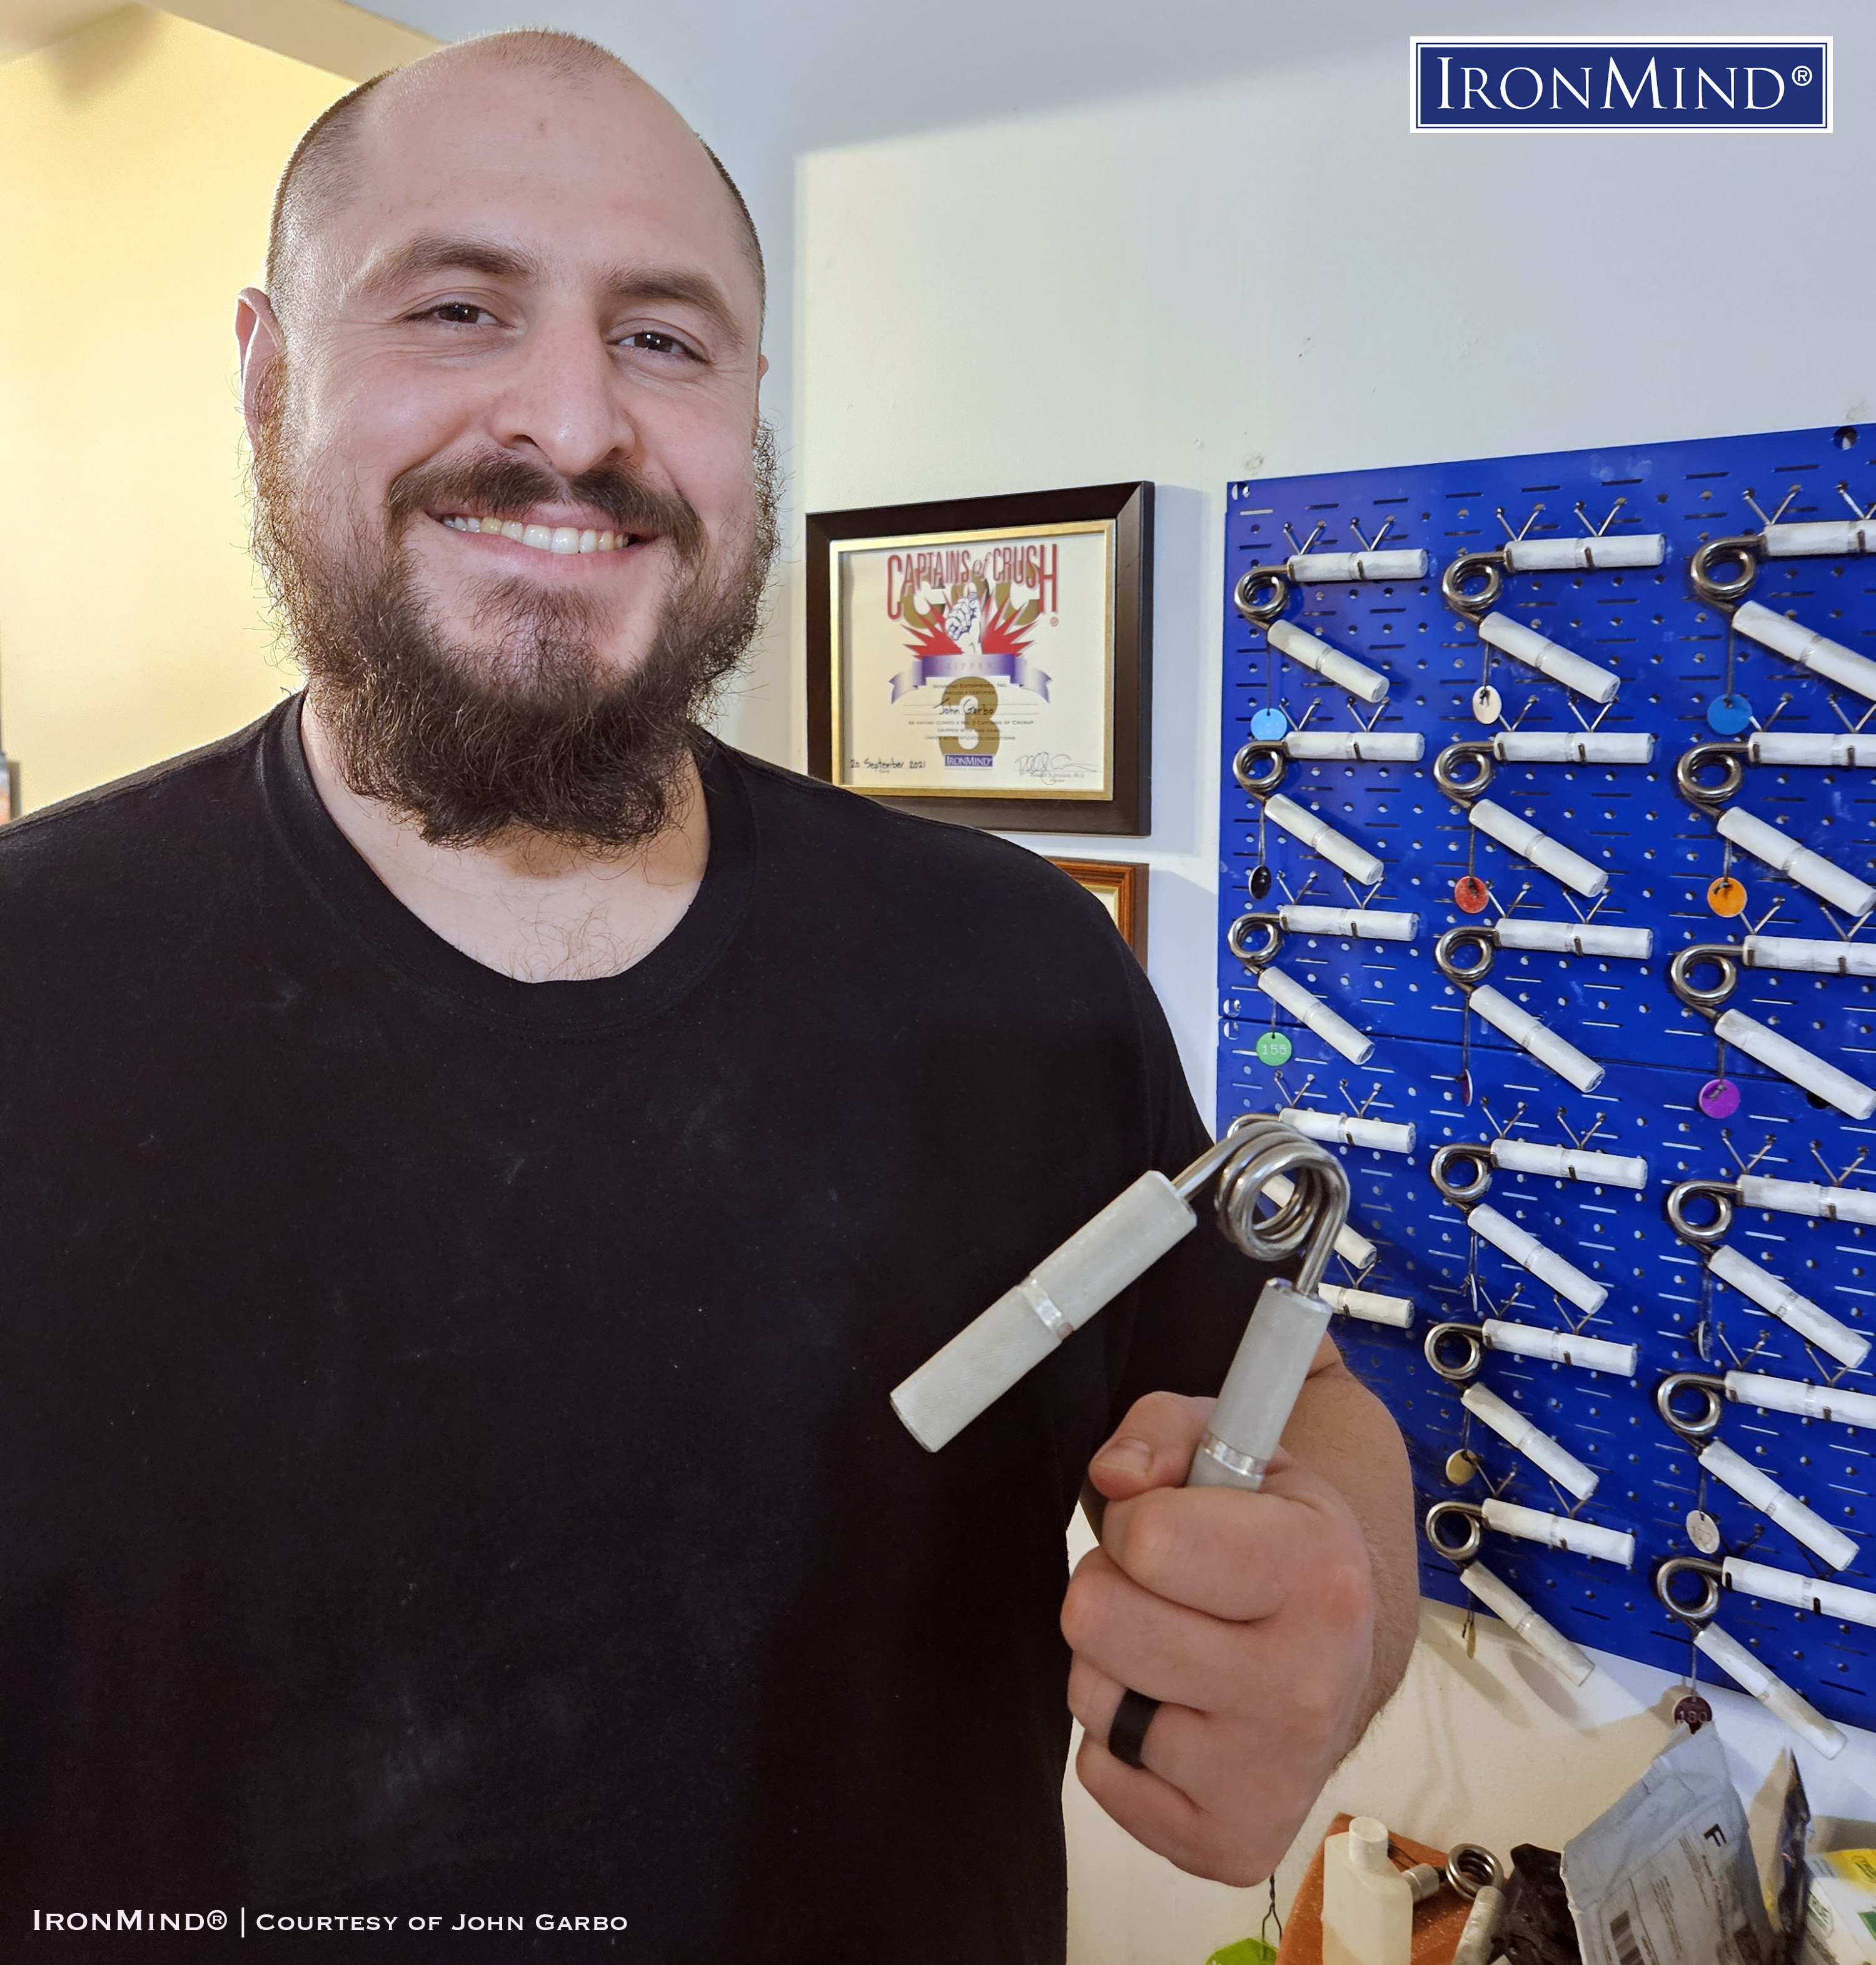 John Garbo, a 35-year old police officer in Ohio, has been certified on the Crushed-To-Dust! Challenge—proving his outstanding all-around grip strength. John is 6’ 1” tall and weighs 310 lb. IronMind® | Courtesy of John Garbo